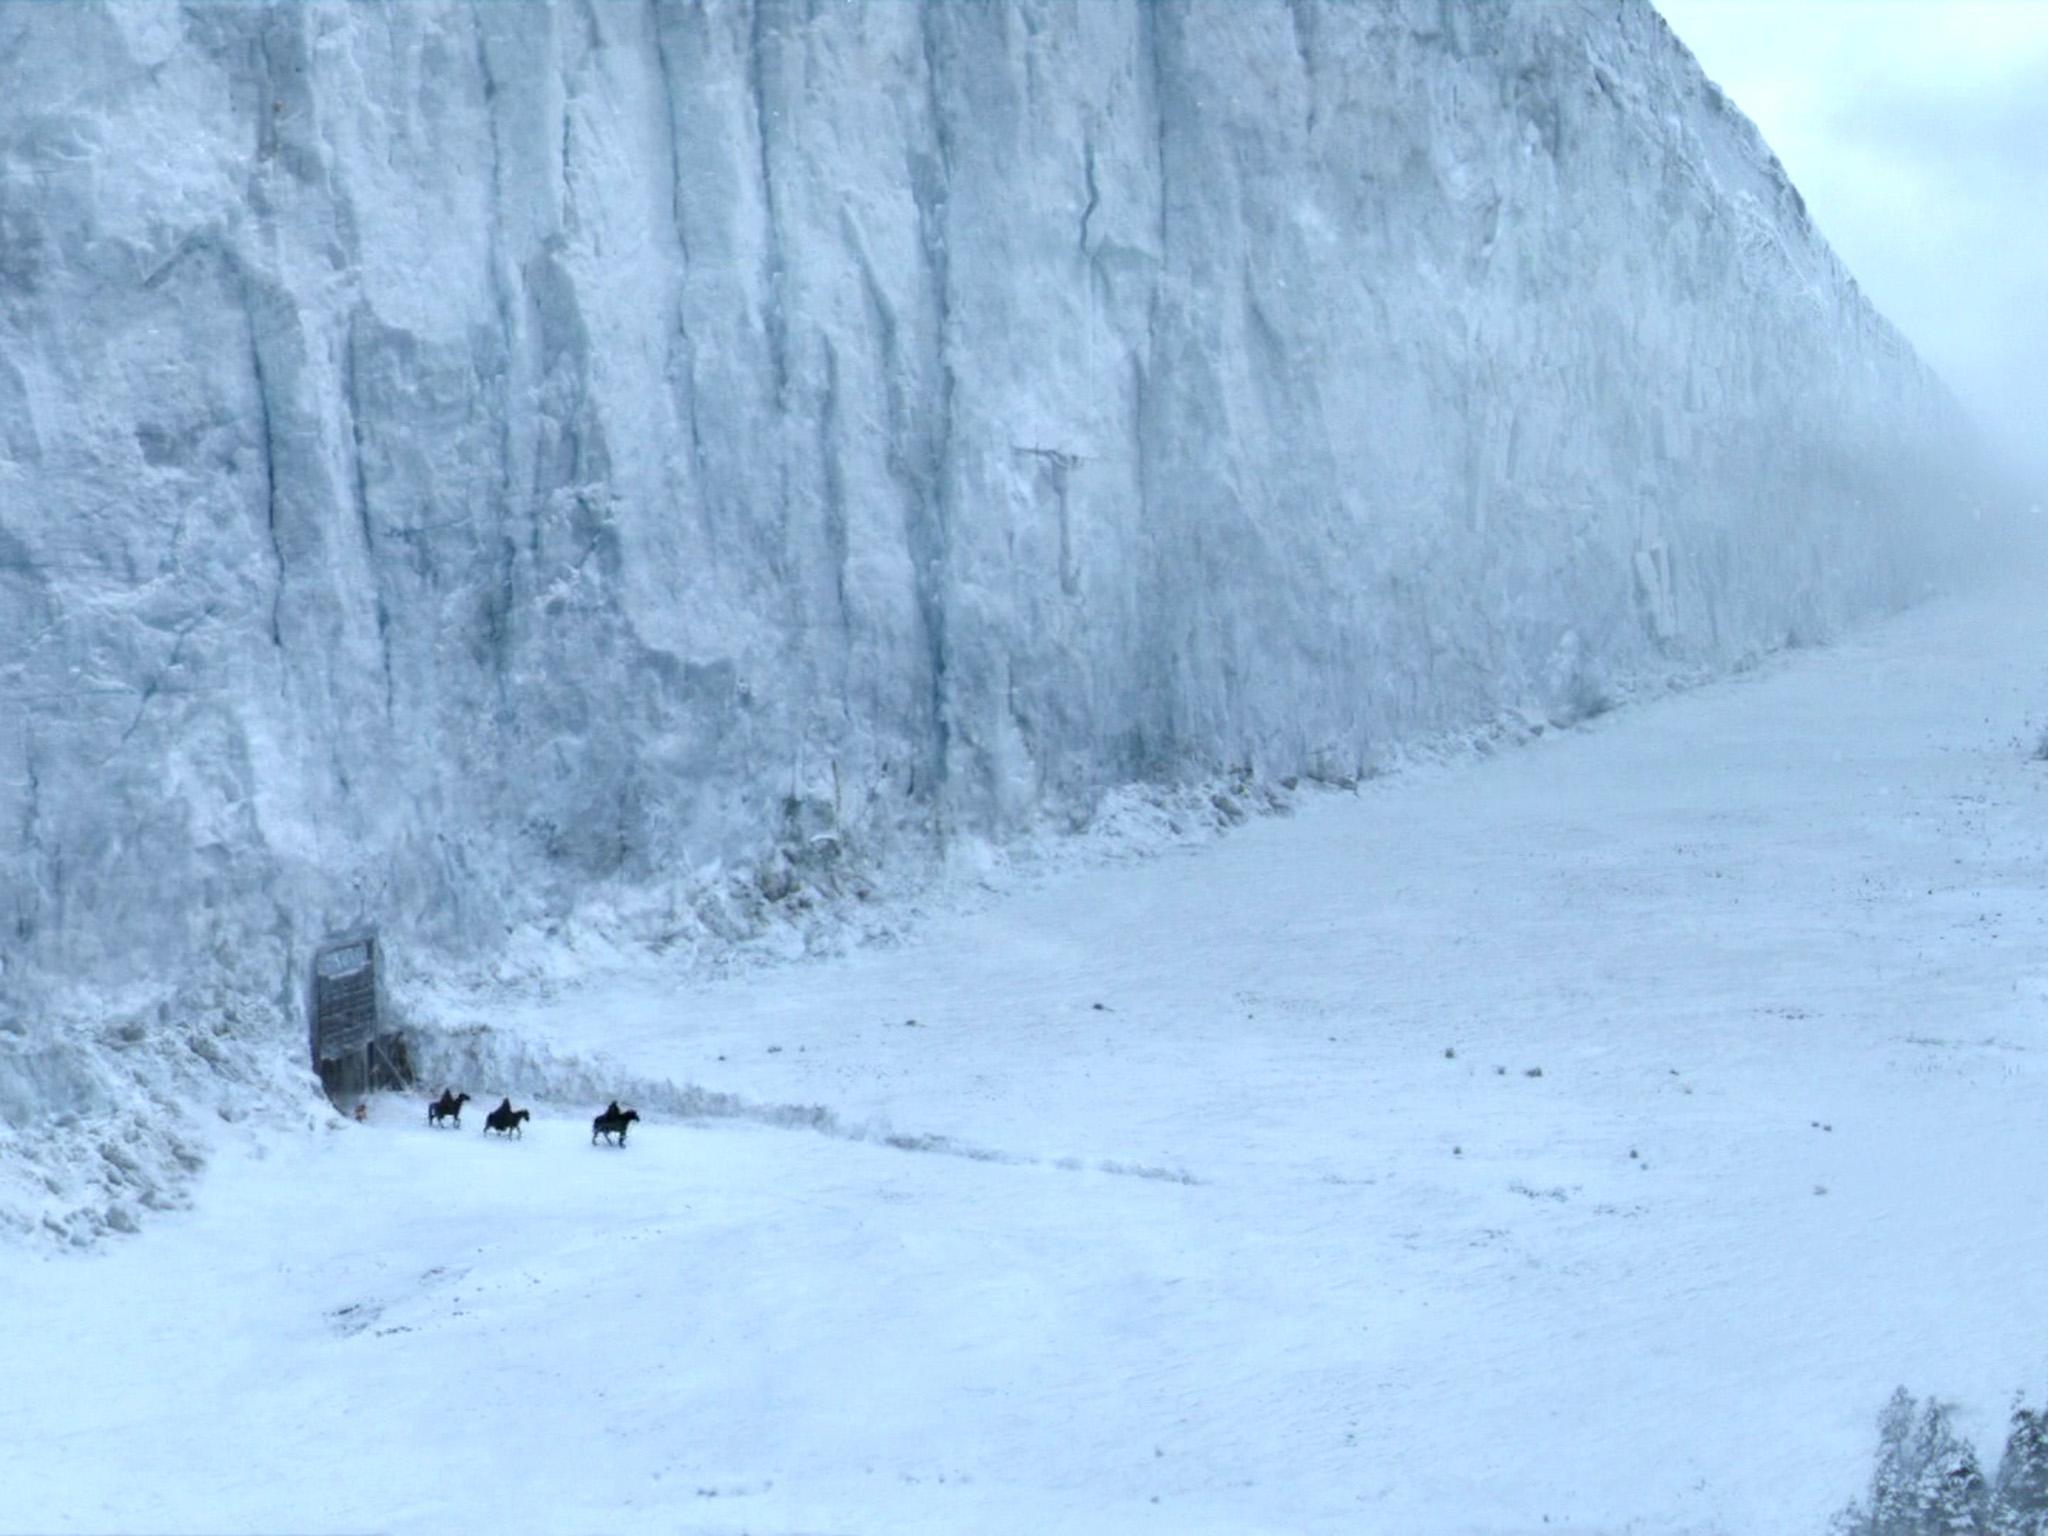 Canadians have threatened to build a giant ice wall like the one in Game of Thrones which keeps wildings and monsters out of the Seven Kingdoms